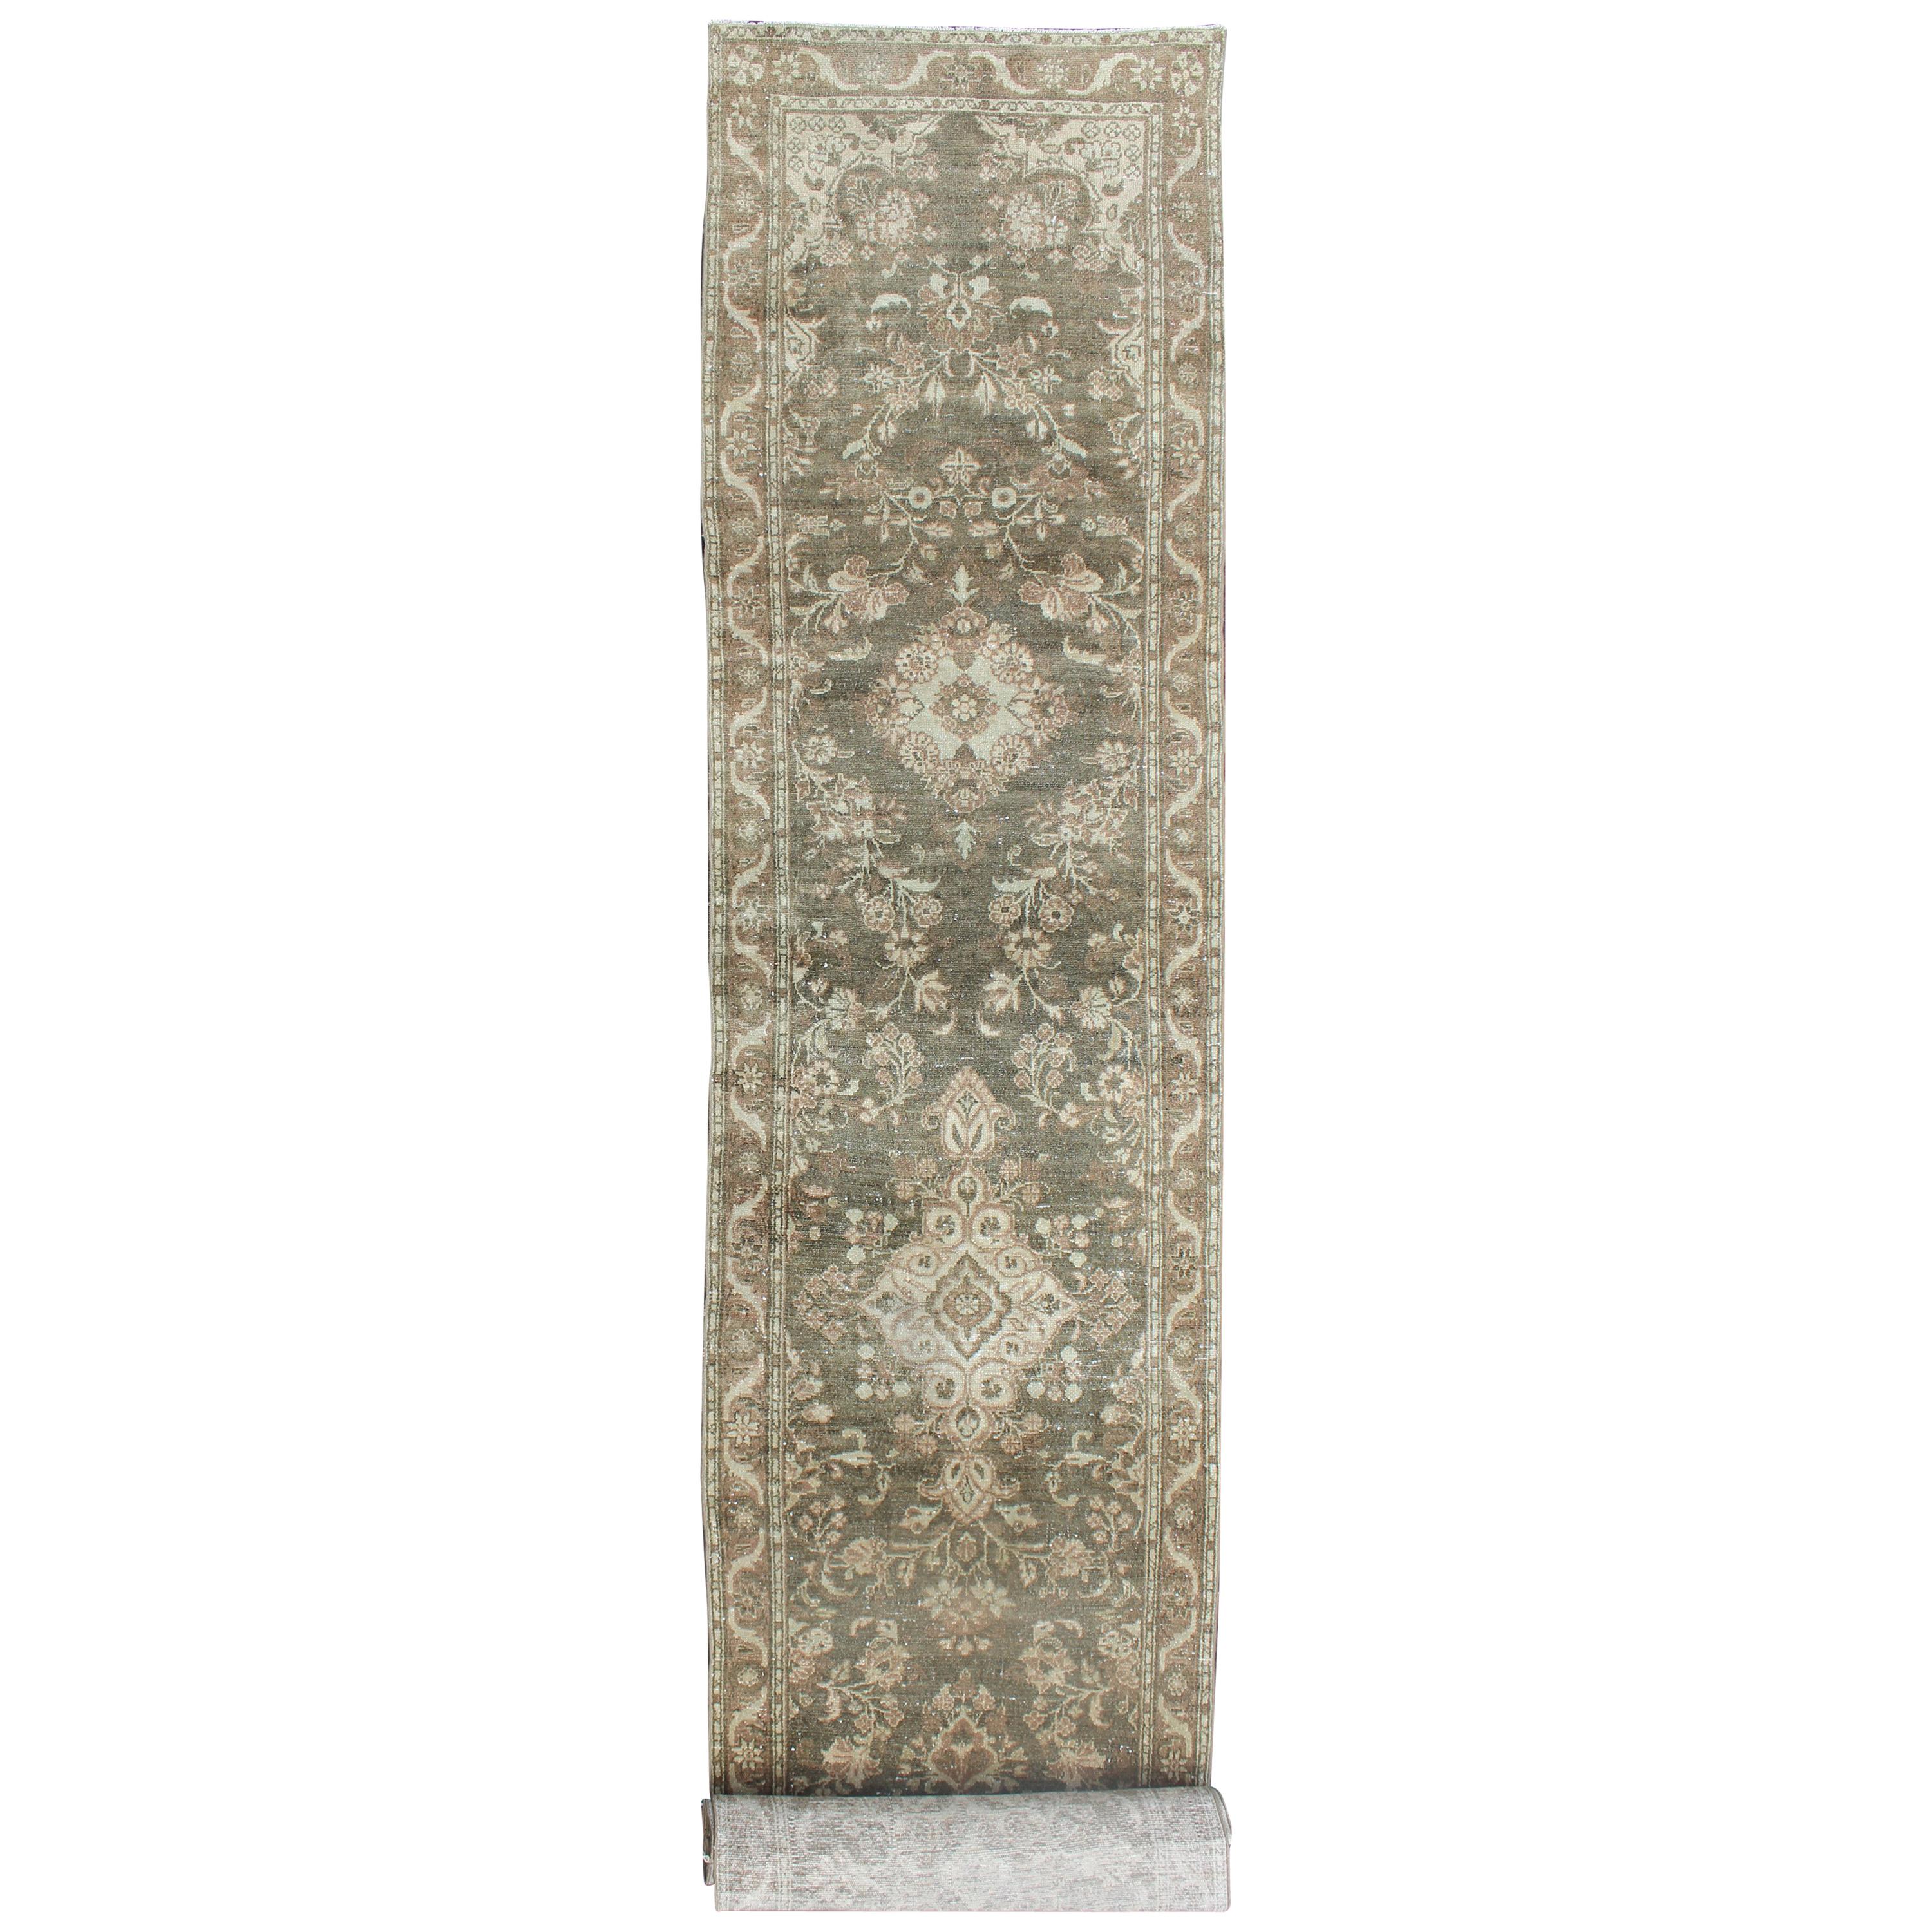 Very Long Antique Persian Runner with Floral Medallions in Warm Sage Green